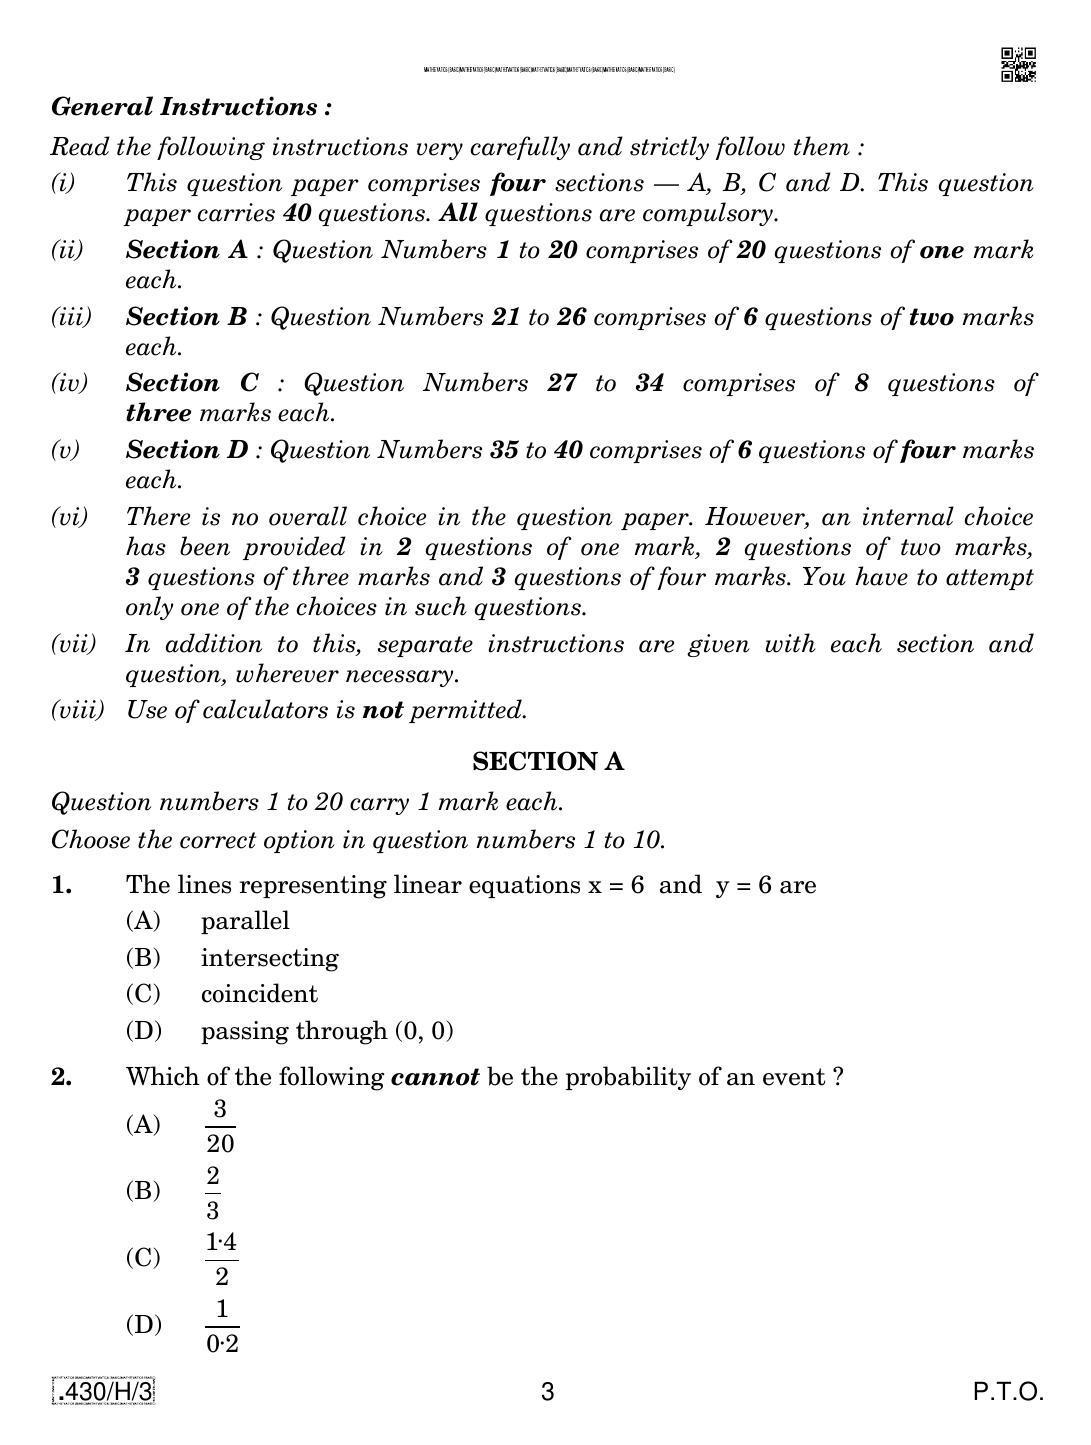 CBSE Class 10 430-C-3 - Maths (Basic) 2020 Compartment Question Paper - Page 3